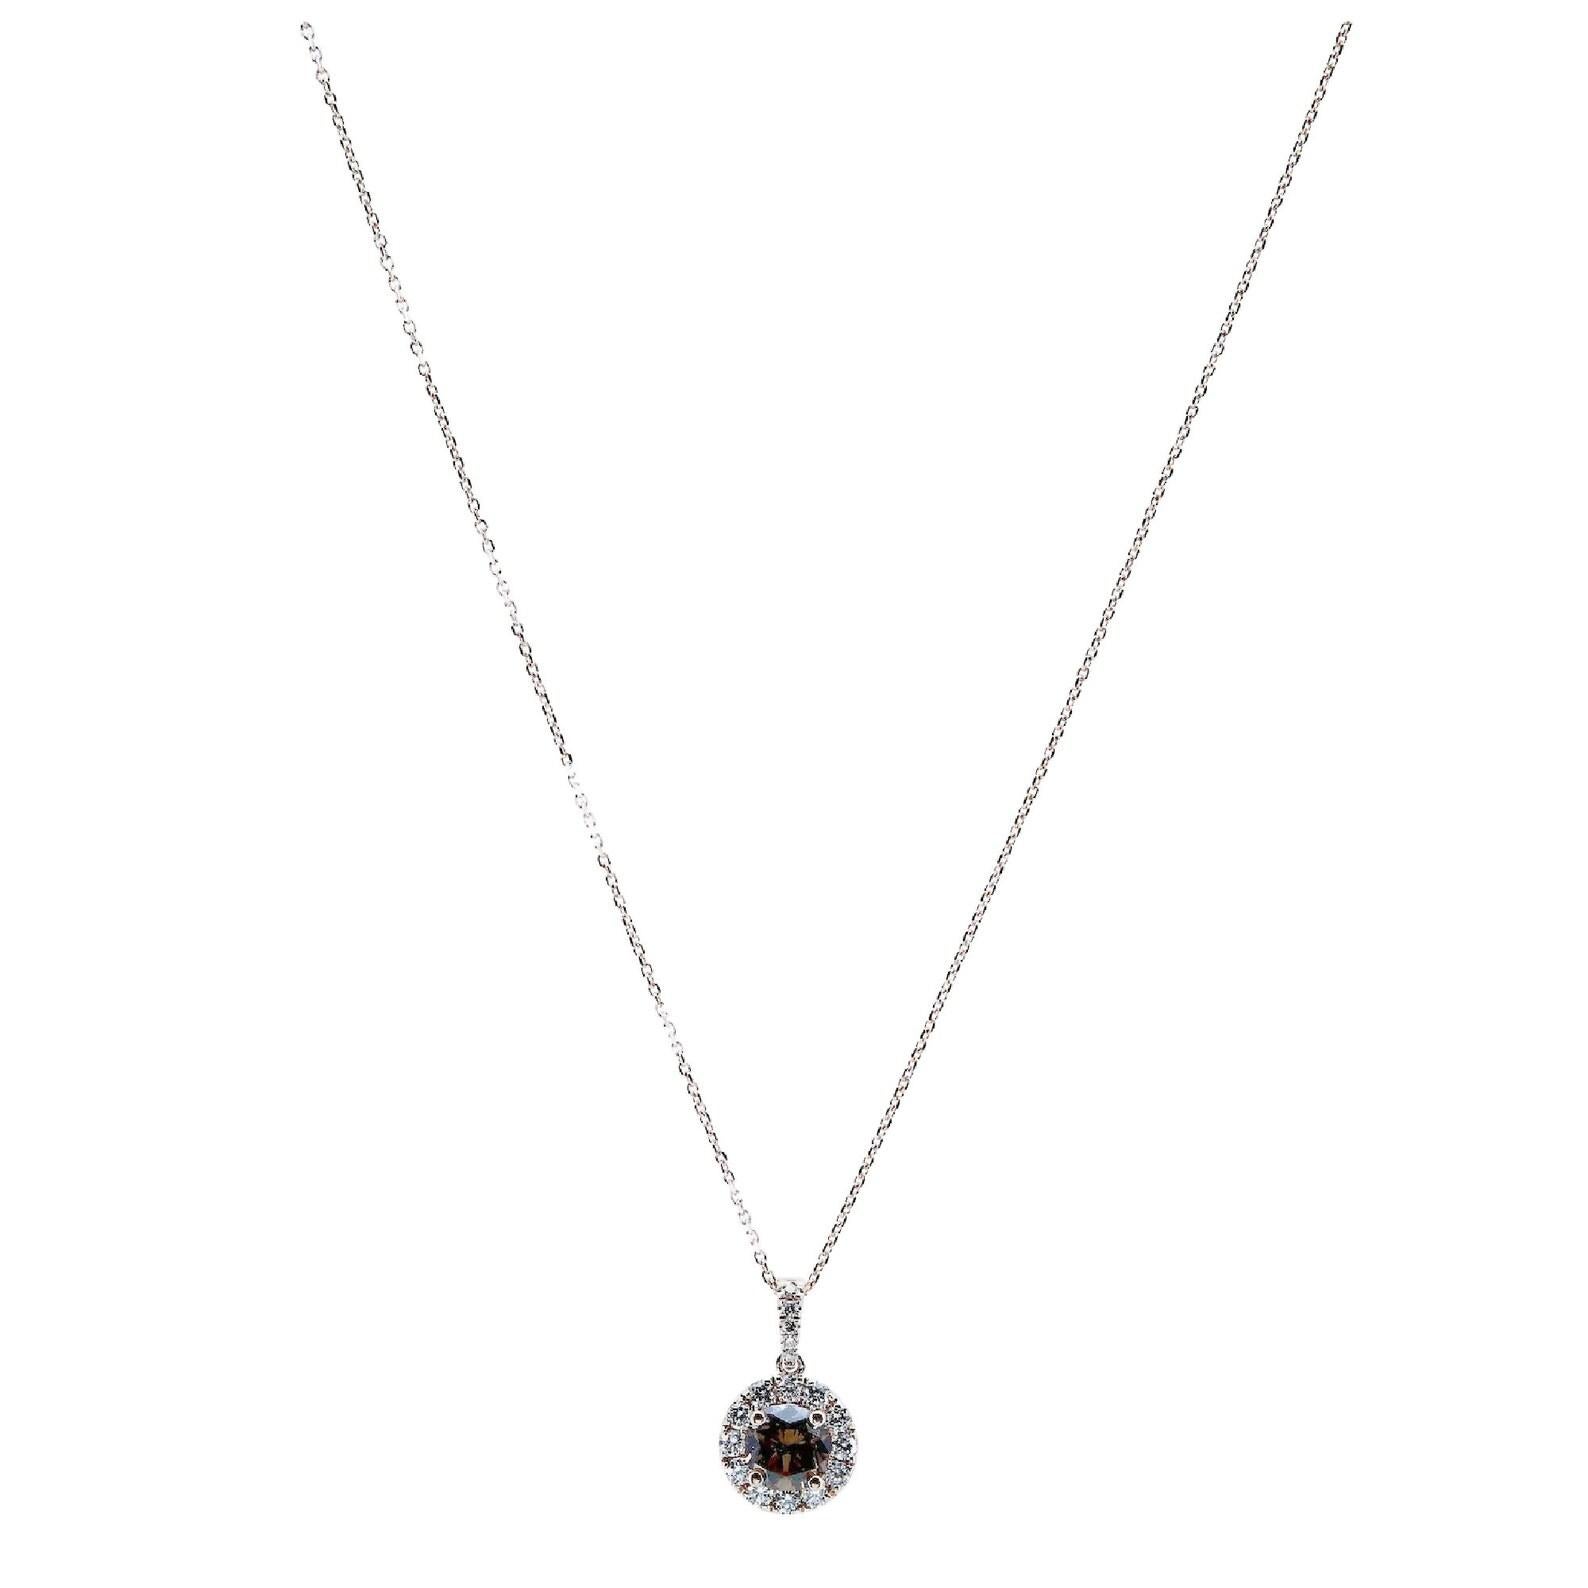 A fancy champagne diamond halo style pendant in 14 karat rose gold.

Set with a 0.70 carat natural fancy champagne color center diamond of VS2 clarity.

Encircled and accented by 0.27 carats of G color VS2 clarity round brilliant cut